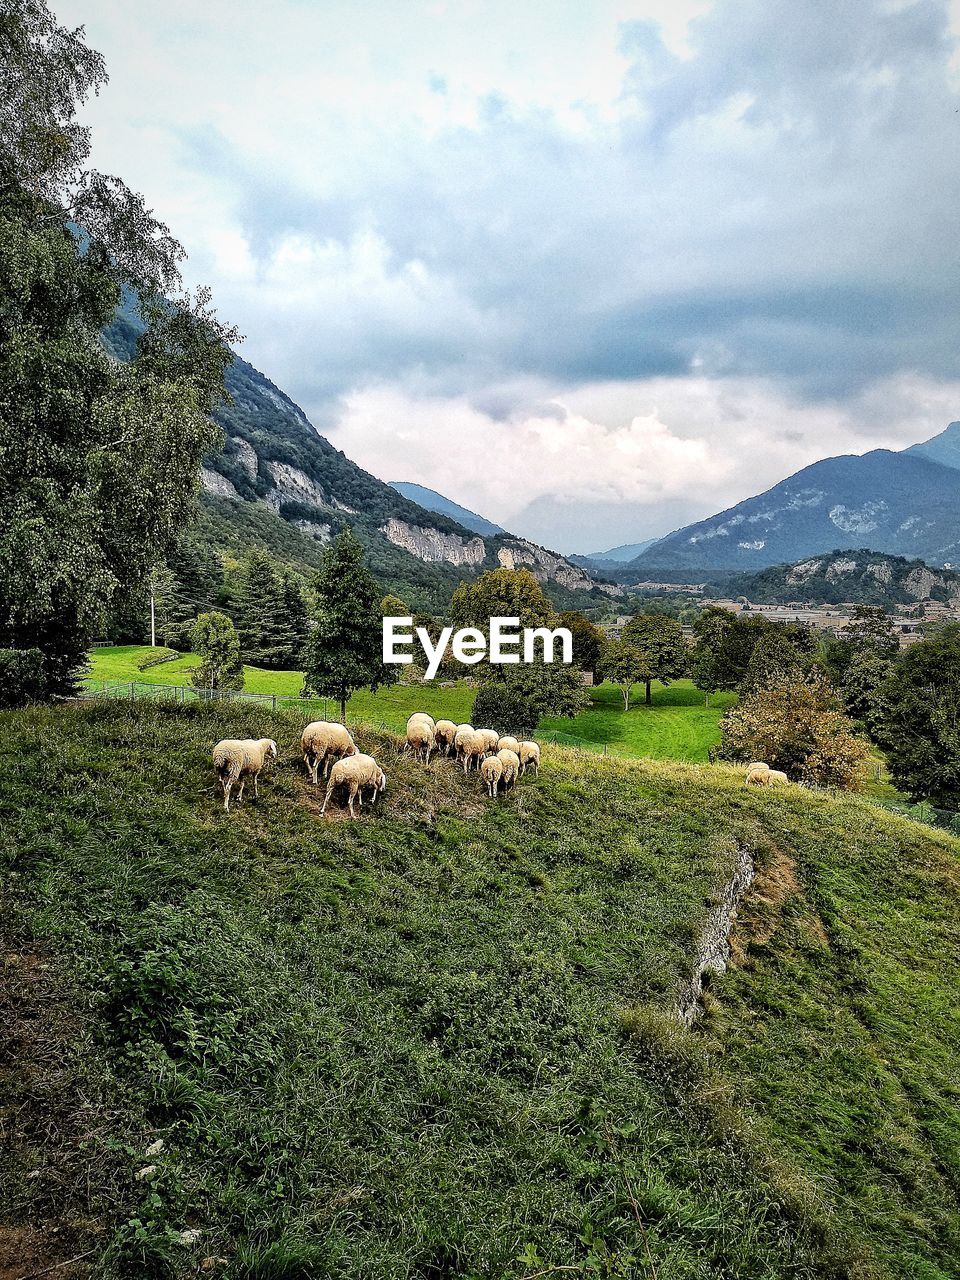 Scenic view of sheep in grassy field against sky